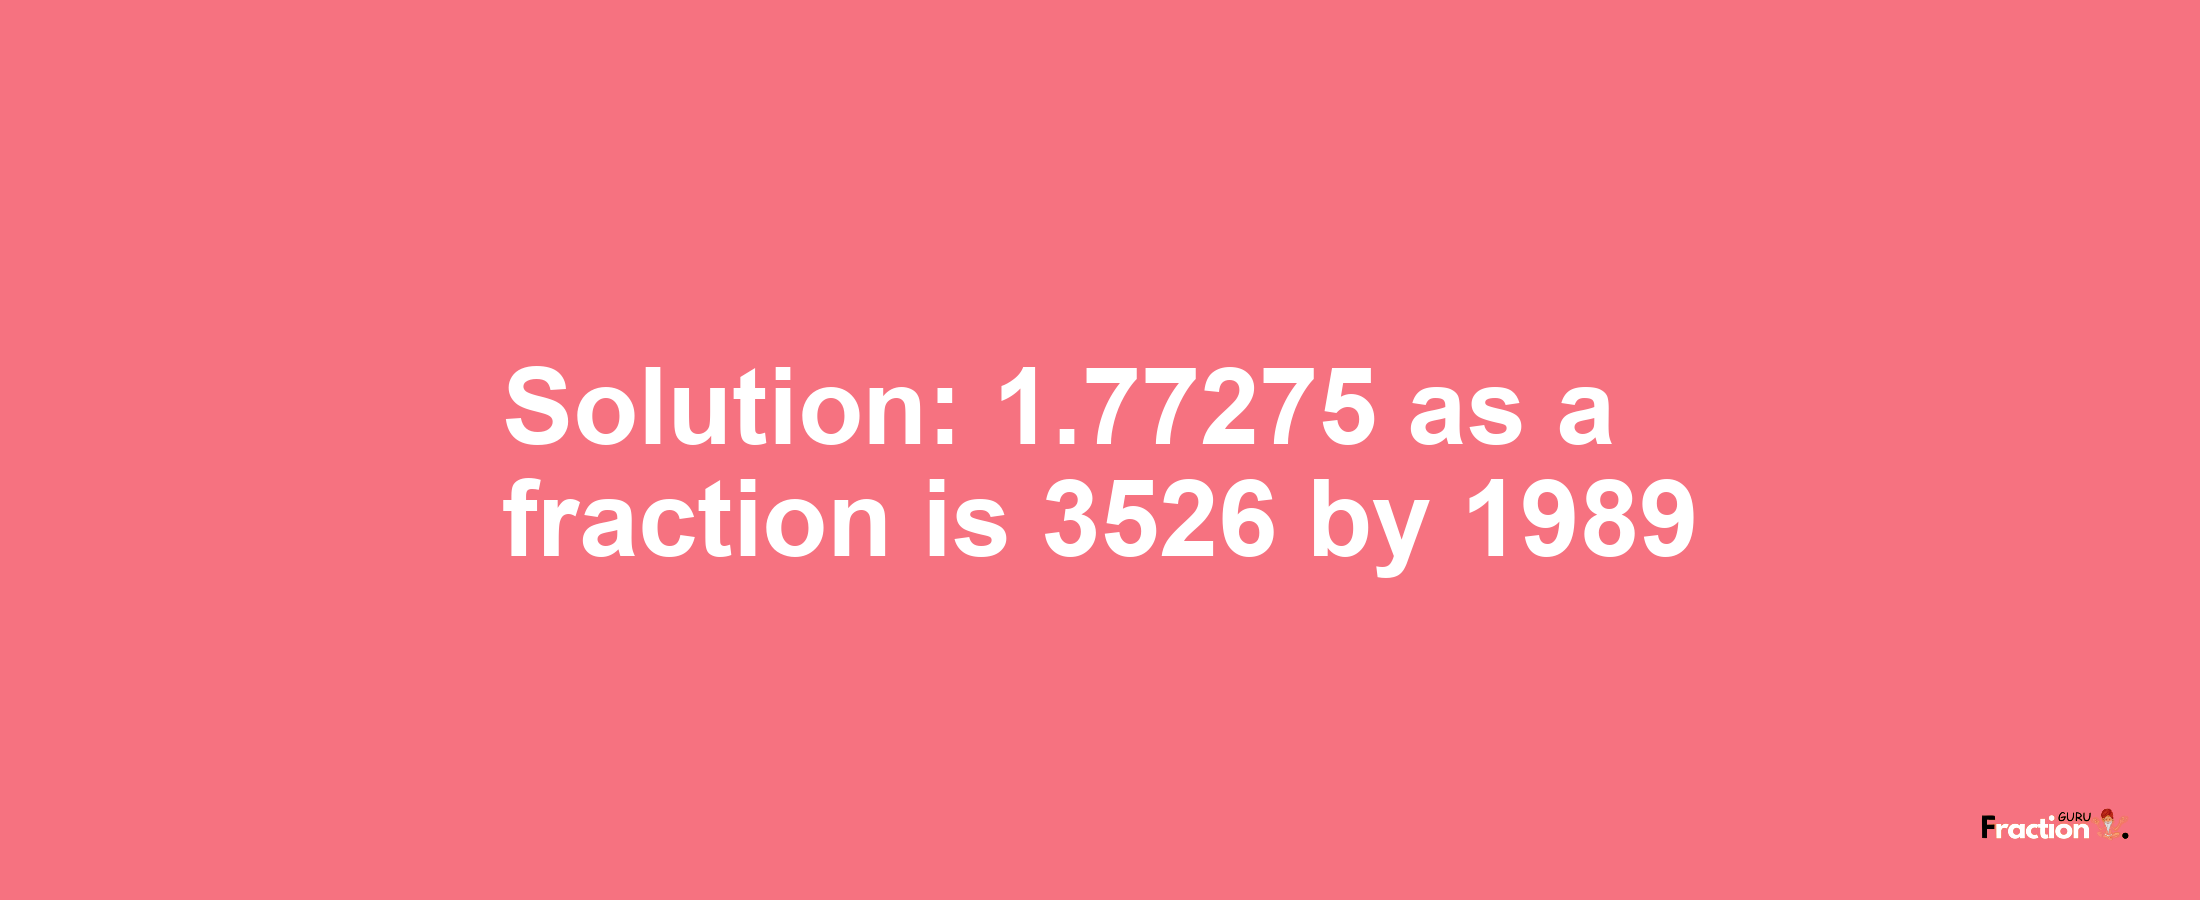 Solution:1.77275 as a fraction is 3526/1989